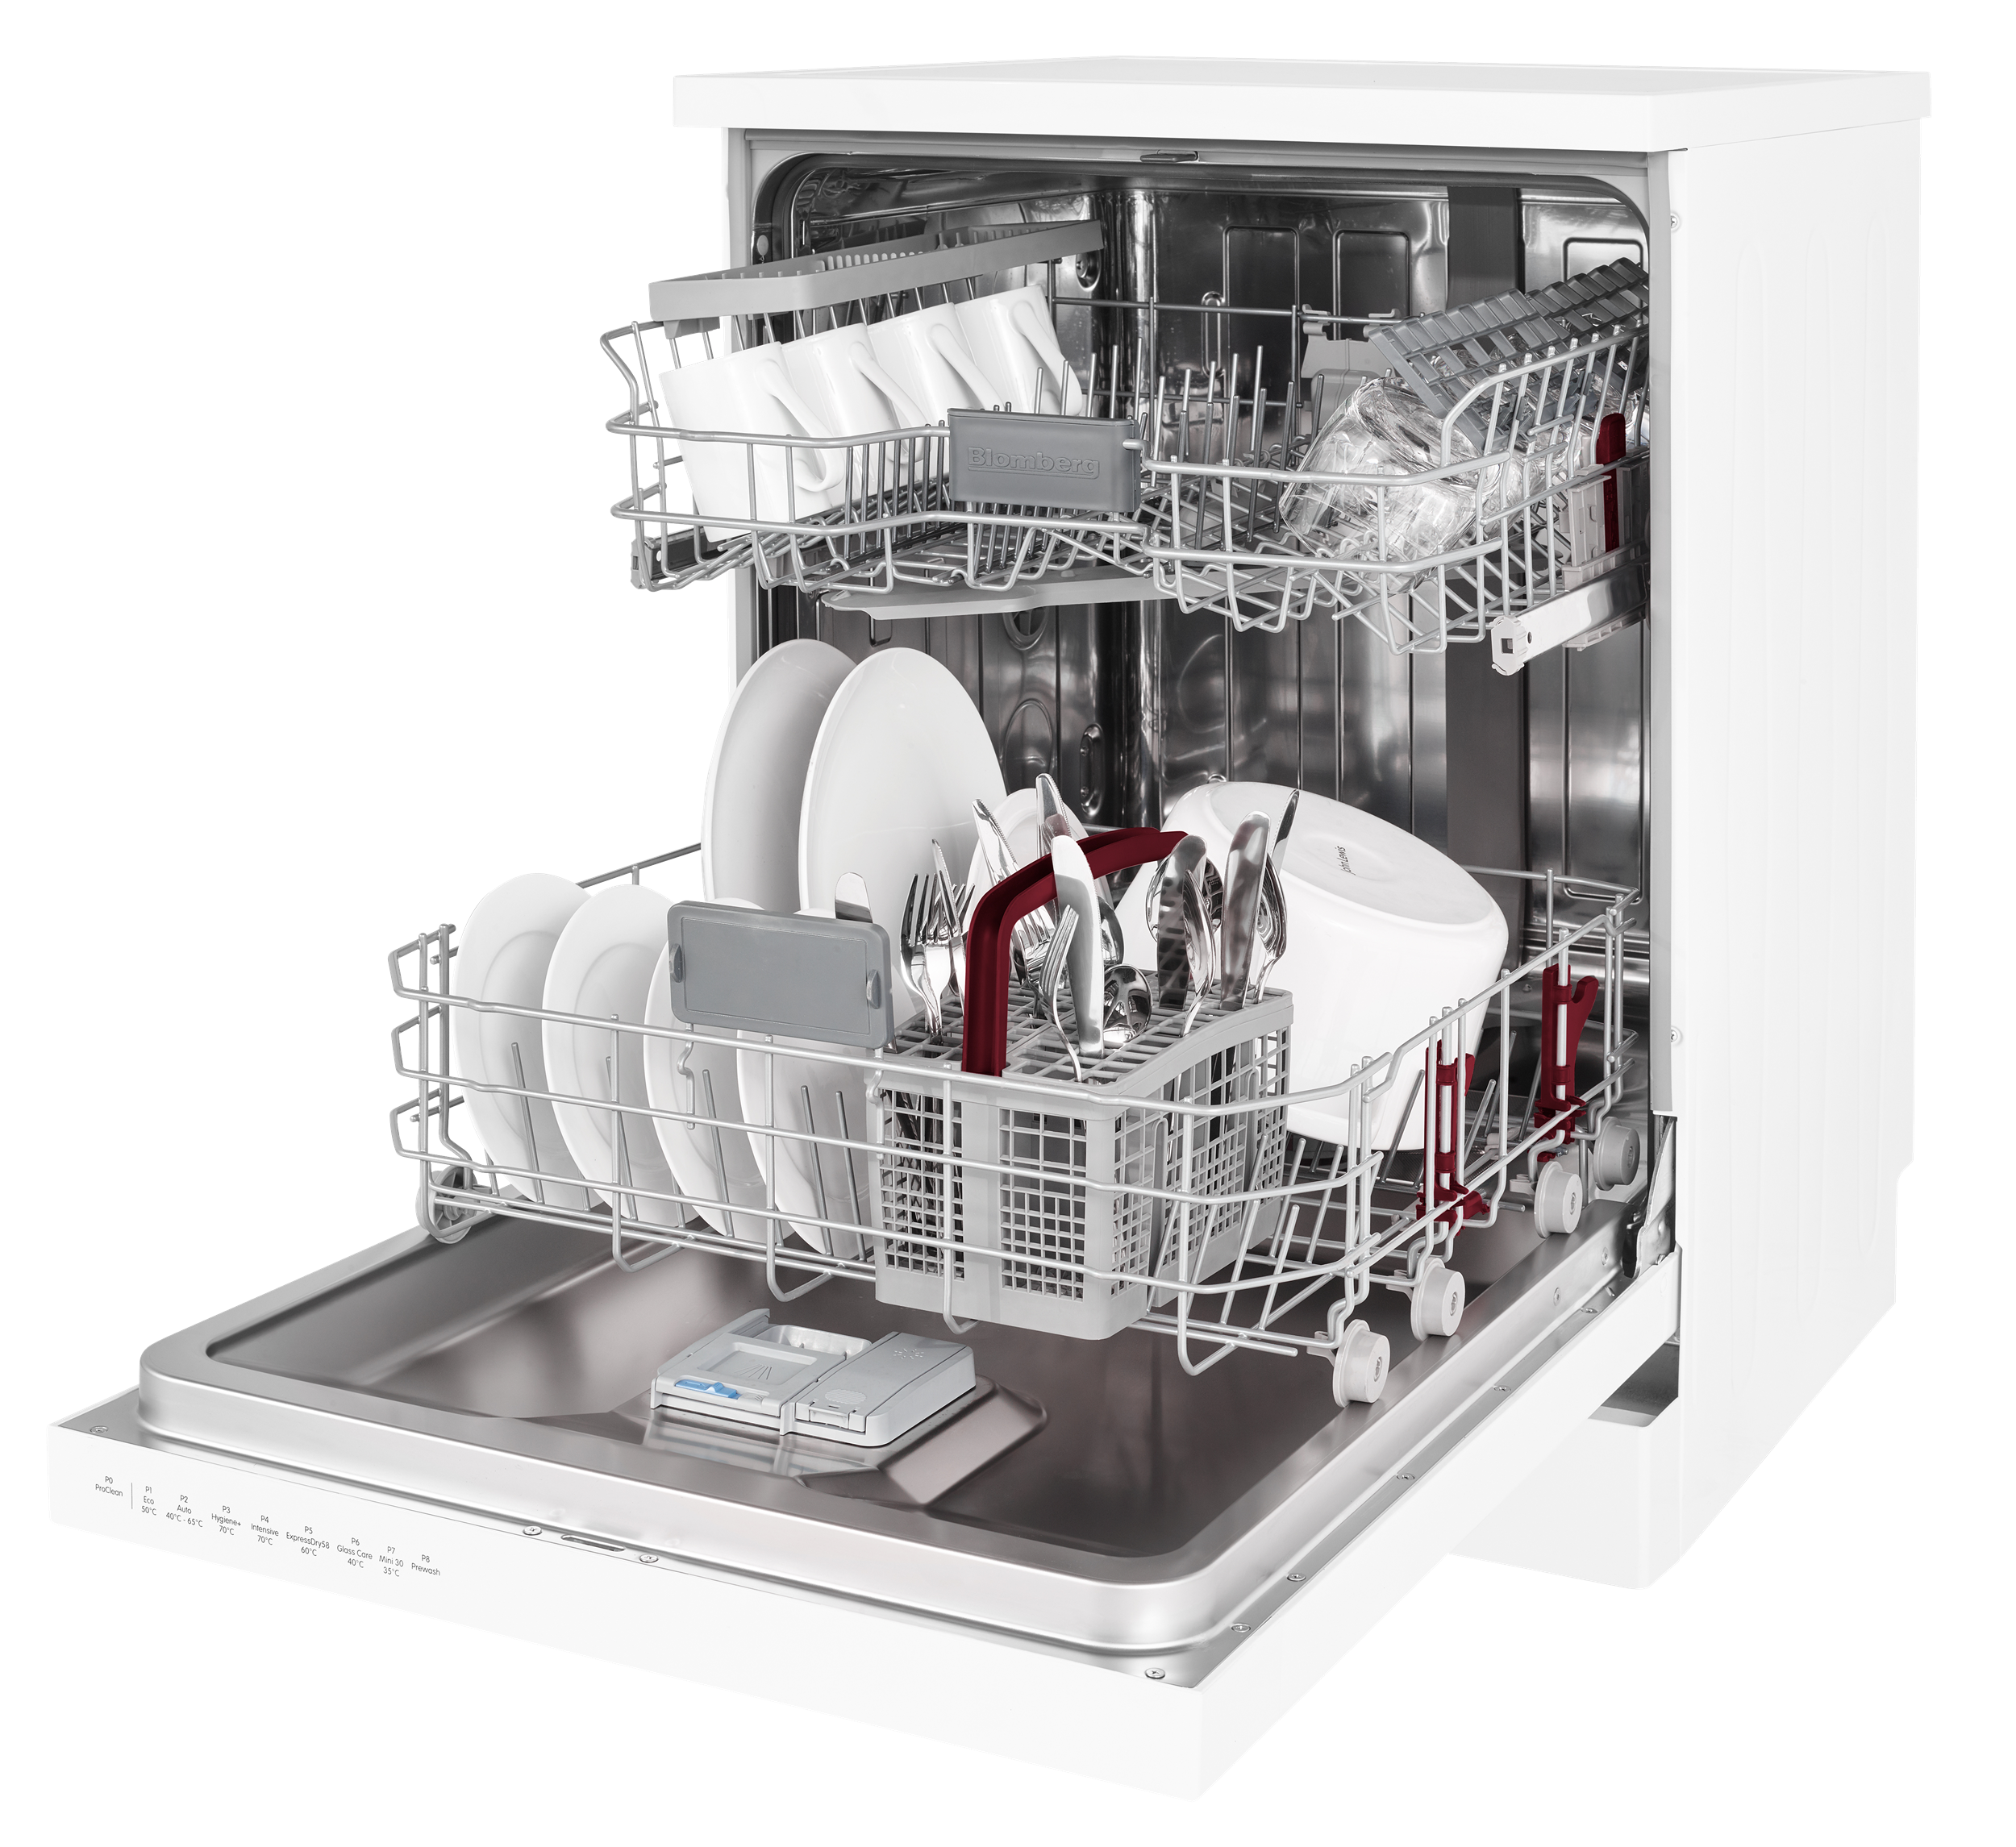 LDF42240 Full Size Dishwasher with A++ energy rating and digital display